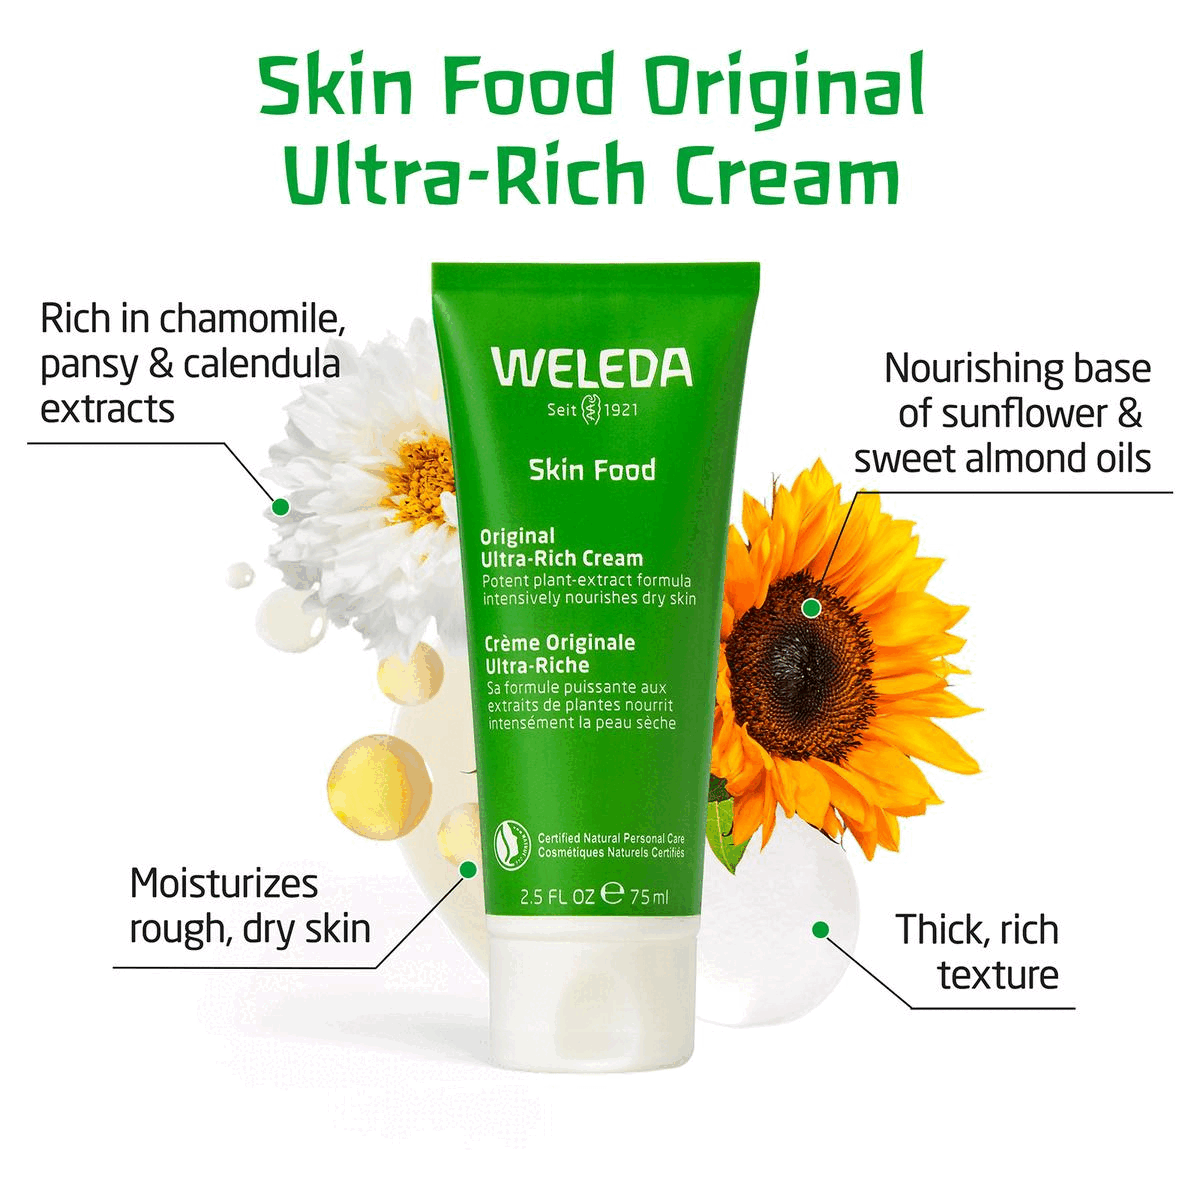 Three images transiting into each other in an endless loop. Image One: Showing an image of the product. Text: Skin Food Original Ultra-Rich Cream. Rich in chamomile, pansy & calendula extracts. Nourishing base of sunflower & sweet almond oils. Potent plant-extract formula intensively nourishes dry skin. Certified Natural Personal Care. Moisturizes rough, dry skin. Thick, rich texture. Image Two: Showing the product being used on a hand. Text: Best-selling plant-rich moisturizer since 1926. Image Three: Image shows the skin food range. Text: Skin Food. Nourish your skin from Head-to-Toe.